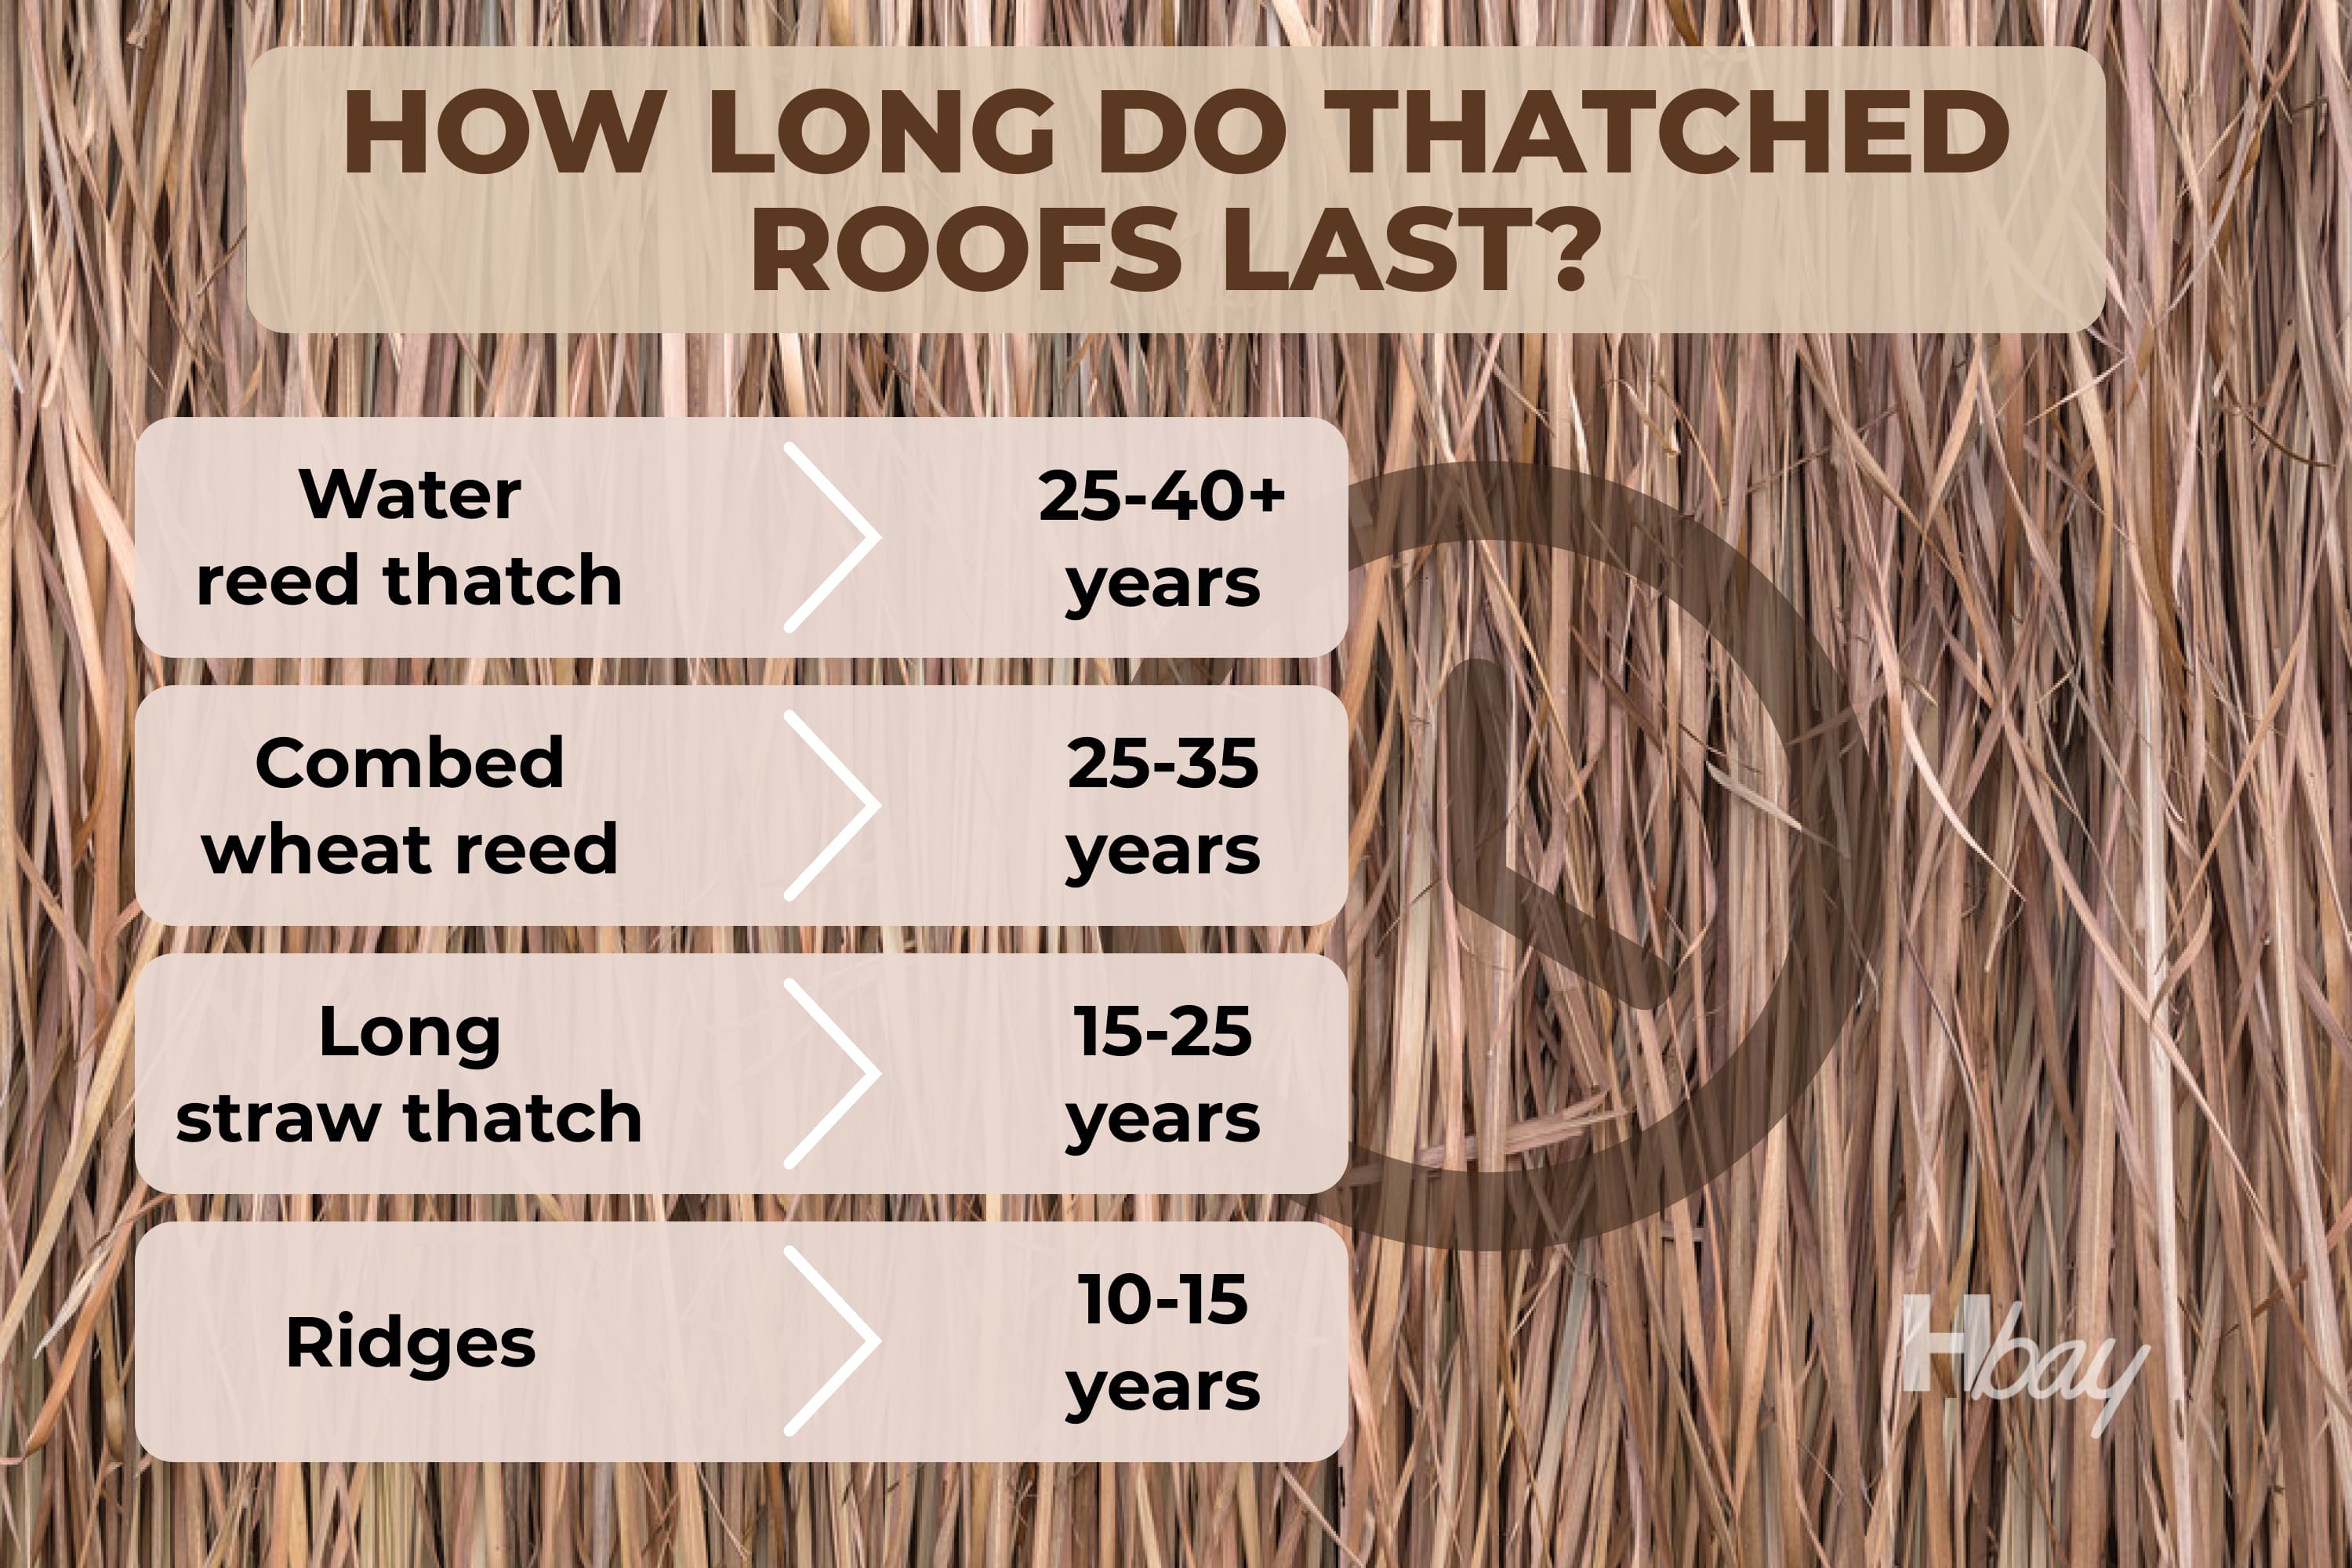 How Long Did Thatched Roofs Last